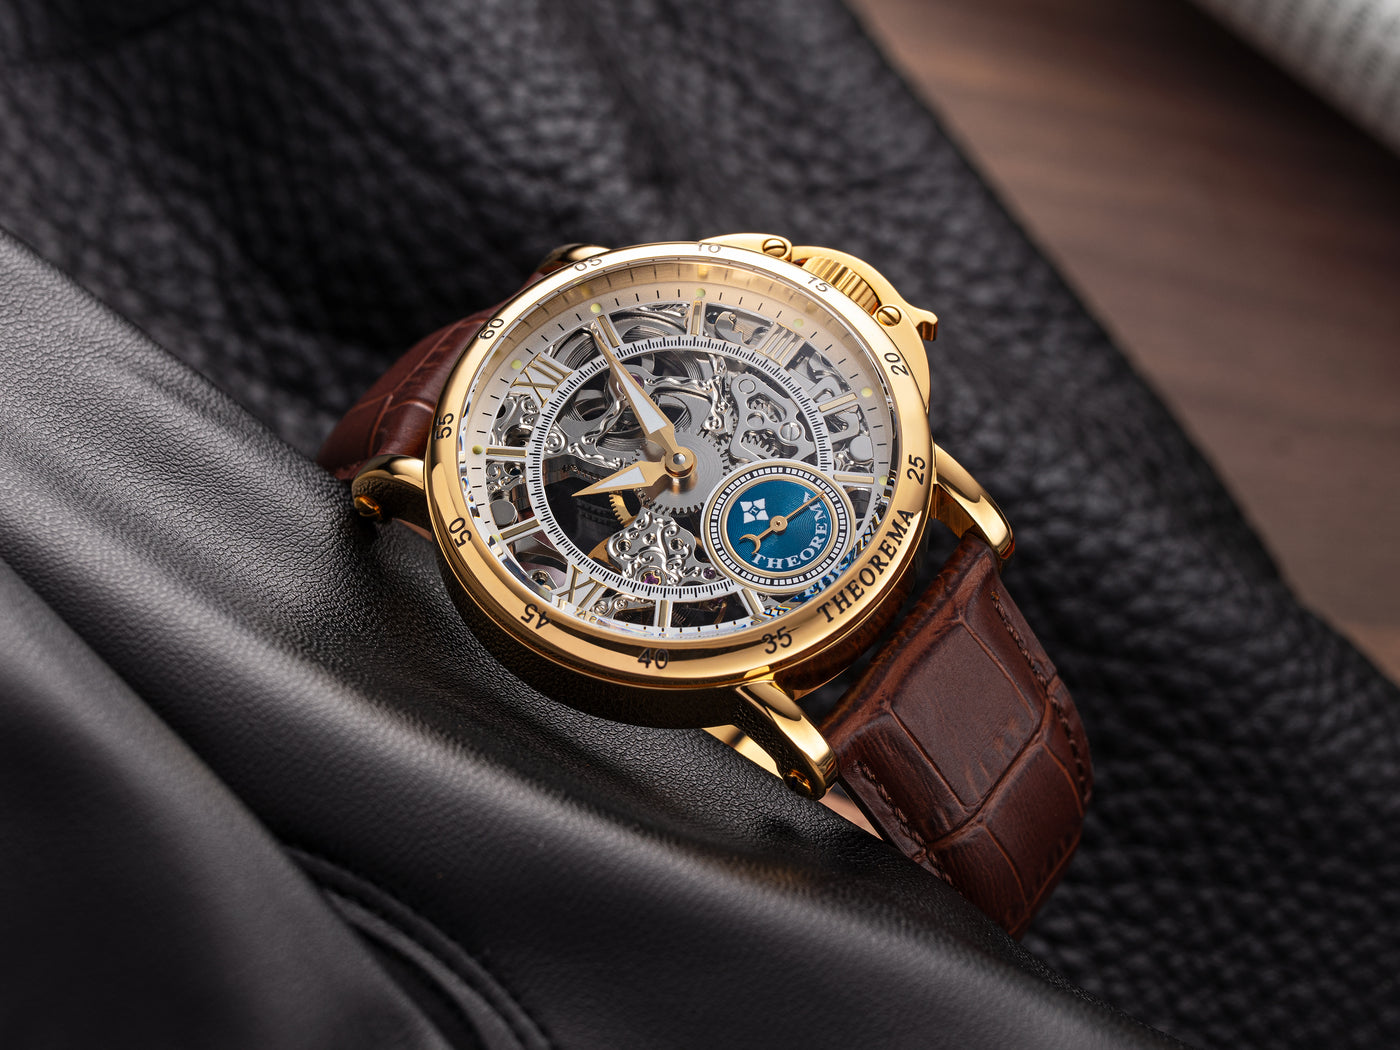 Tufina Pionier Malibu, automatic watch for men with 12 diamonds, a see-through skeleton dial, gold colored case and brown leather band